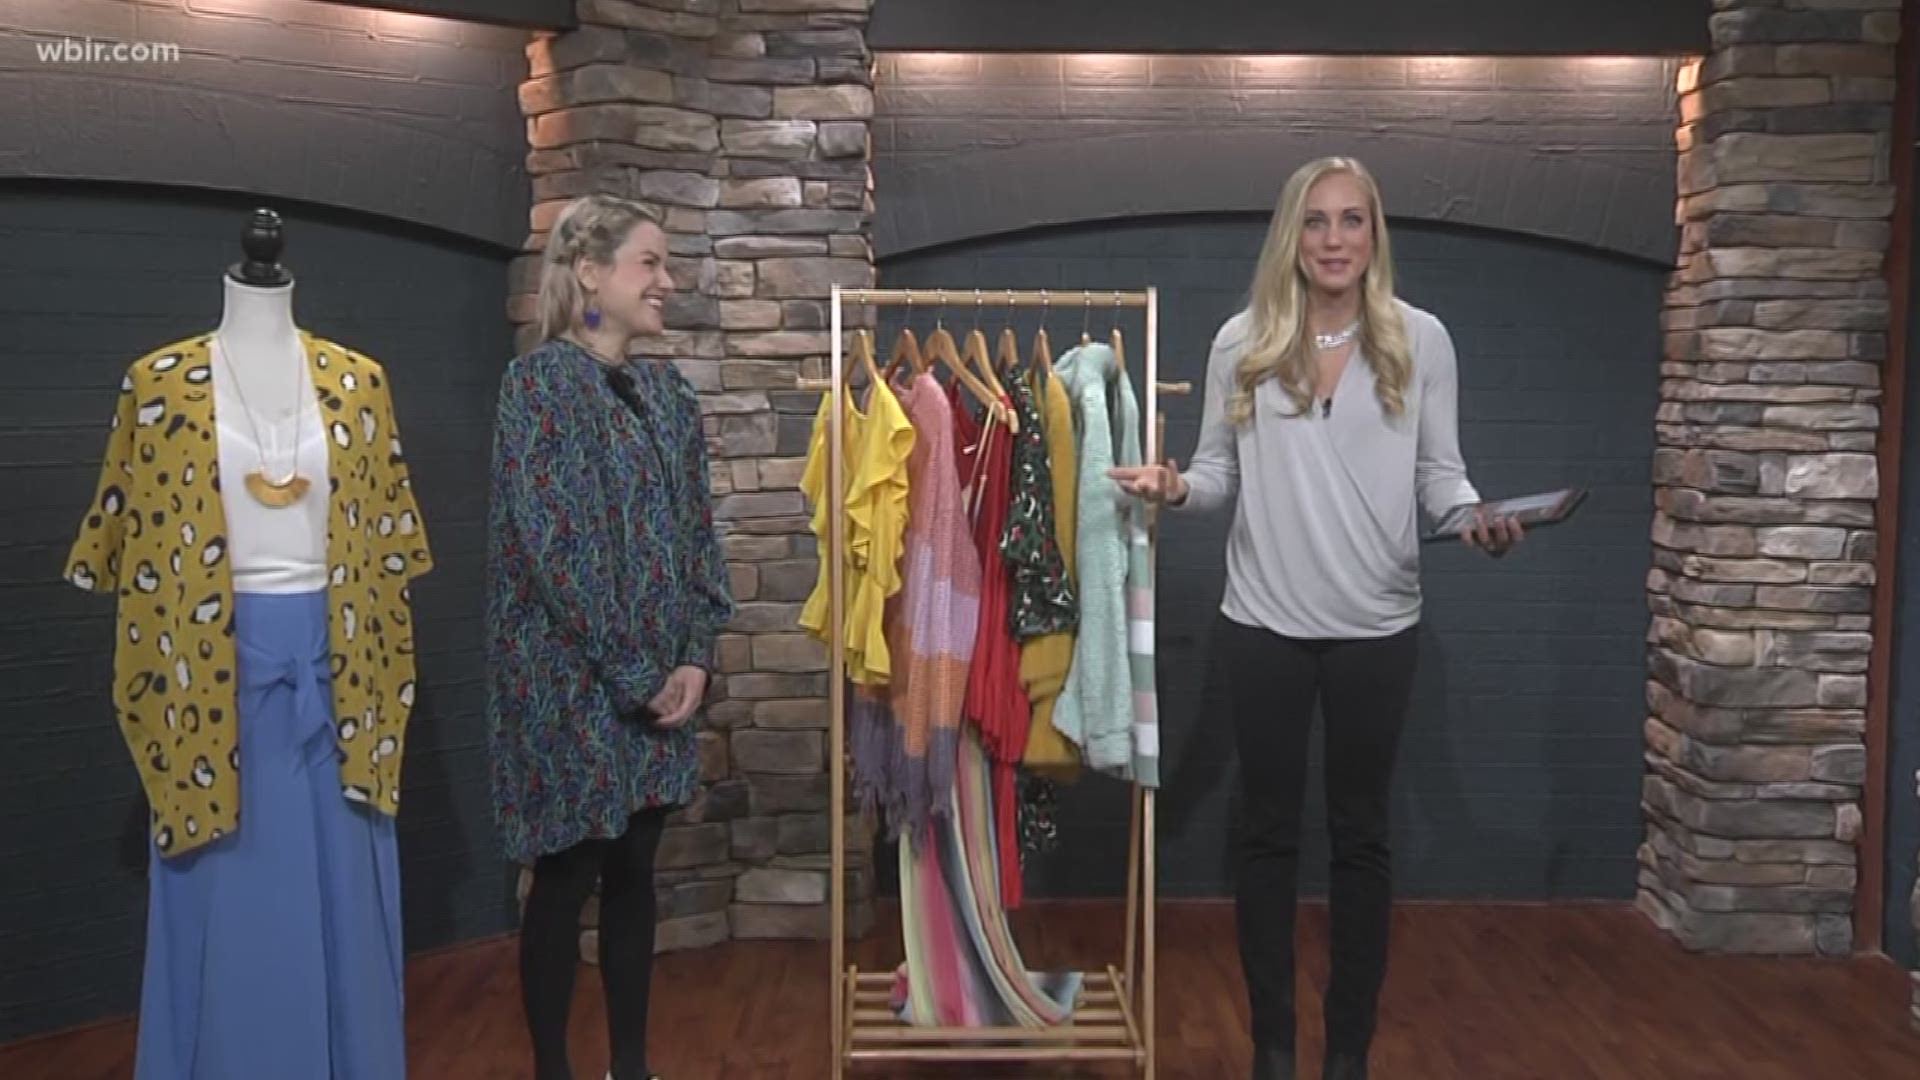 UT retail professor Michelle Childs shows us how to brighten up our winter wardrobe with more colors.